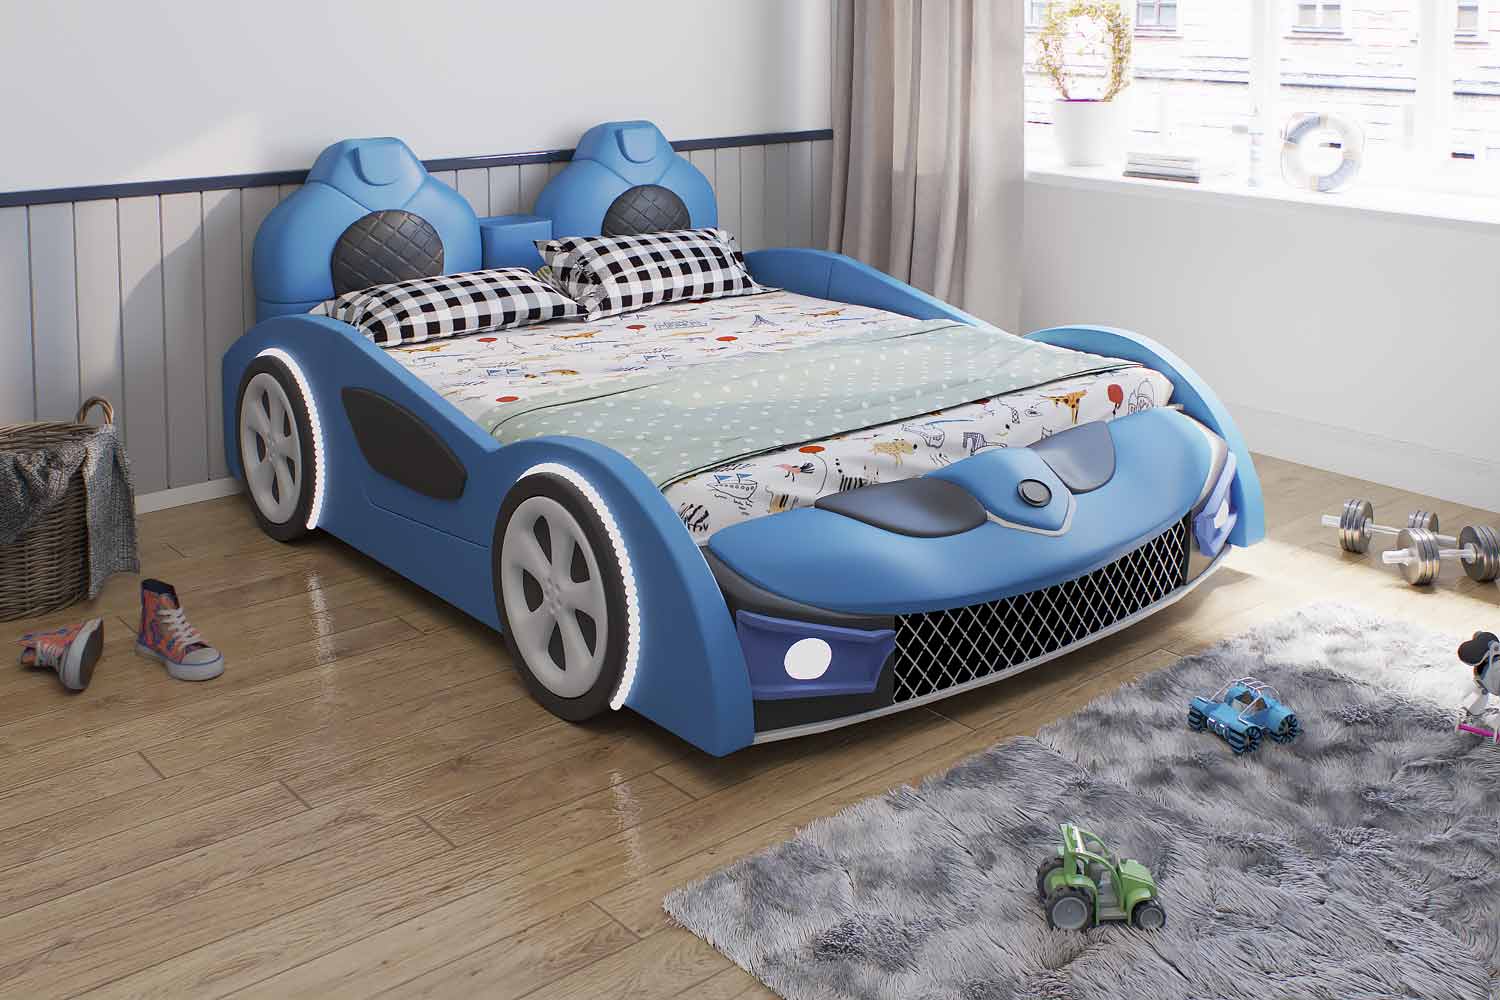 Sleek blue car bed for kids with racing design, set in a bright room with playful accents, ready to fuel your child's racing dreams.